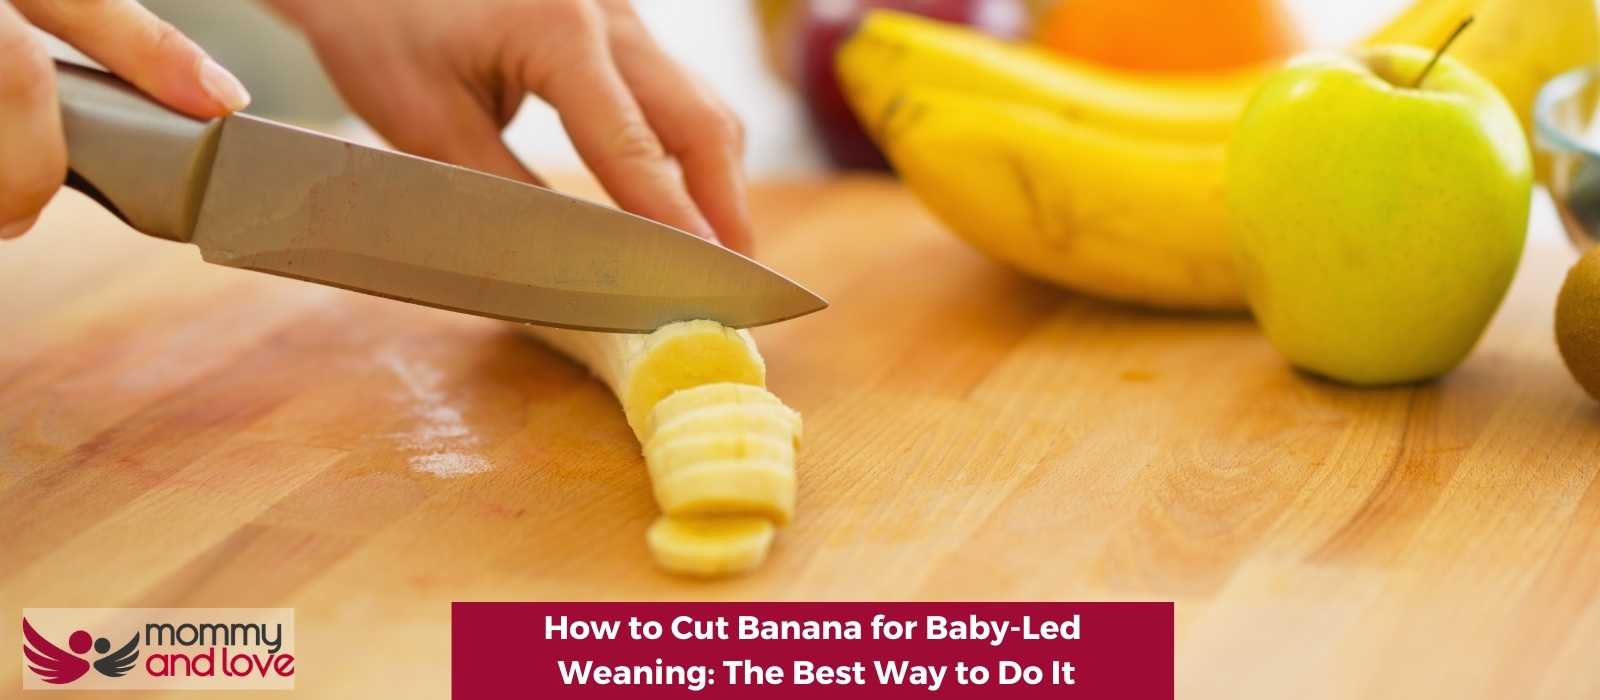 How to Cut Banana for Baby-Led Weaning The Best Way to Do It